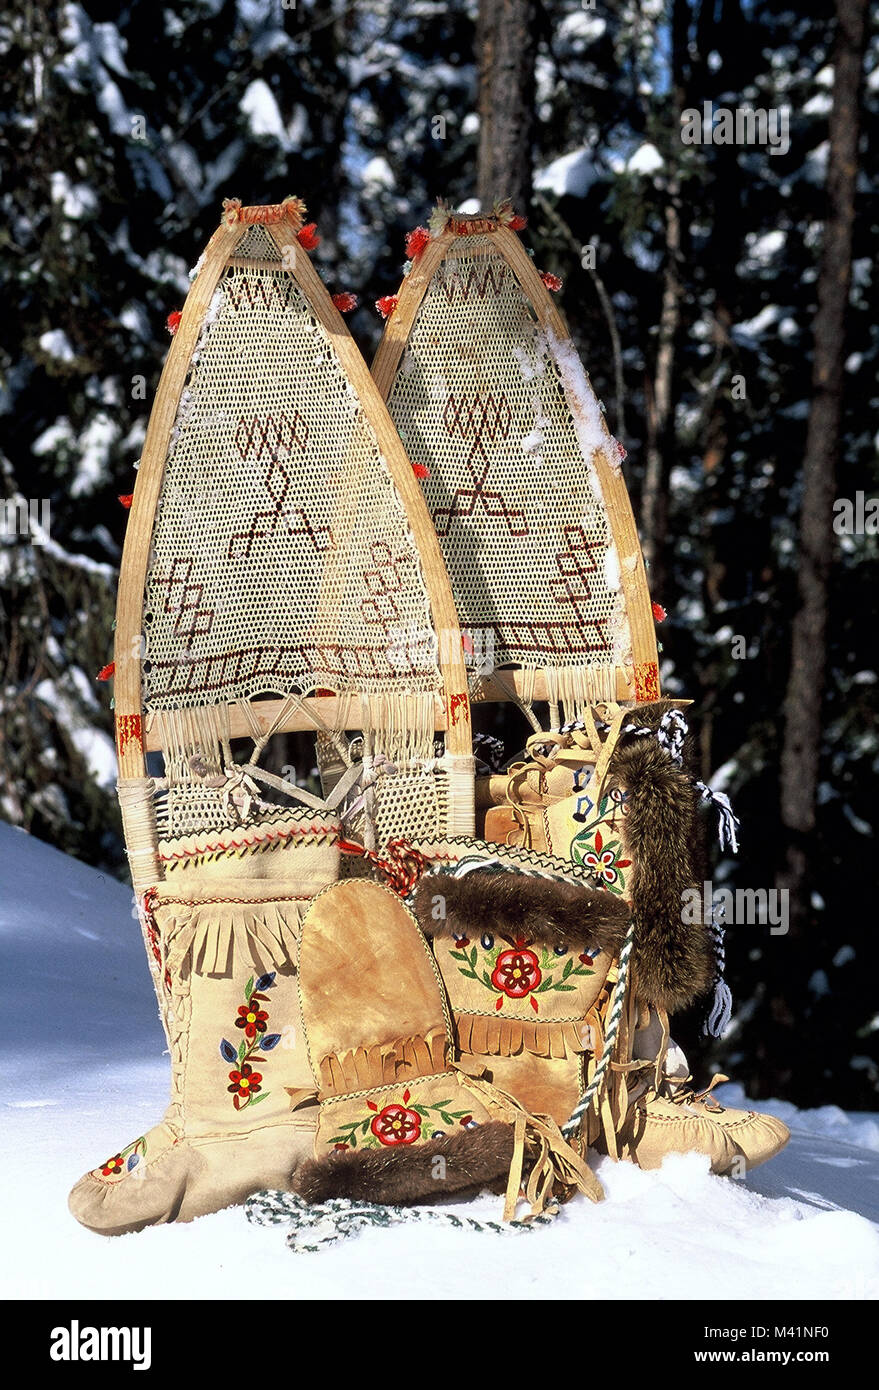 Canada, Quebec Province, Amerindian craft industry, traditional snowshoes made of wood and leather thin straps, mittens and boots made of deer skin Stock Photo